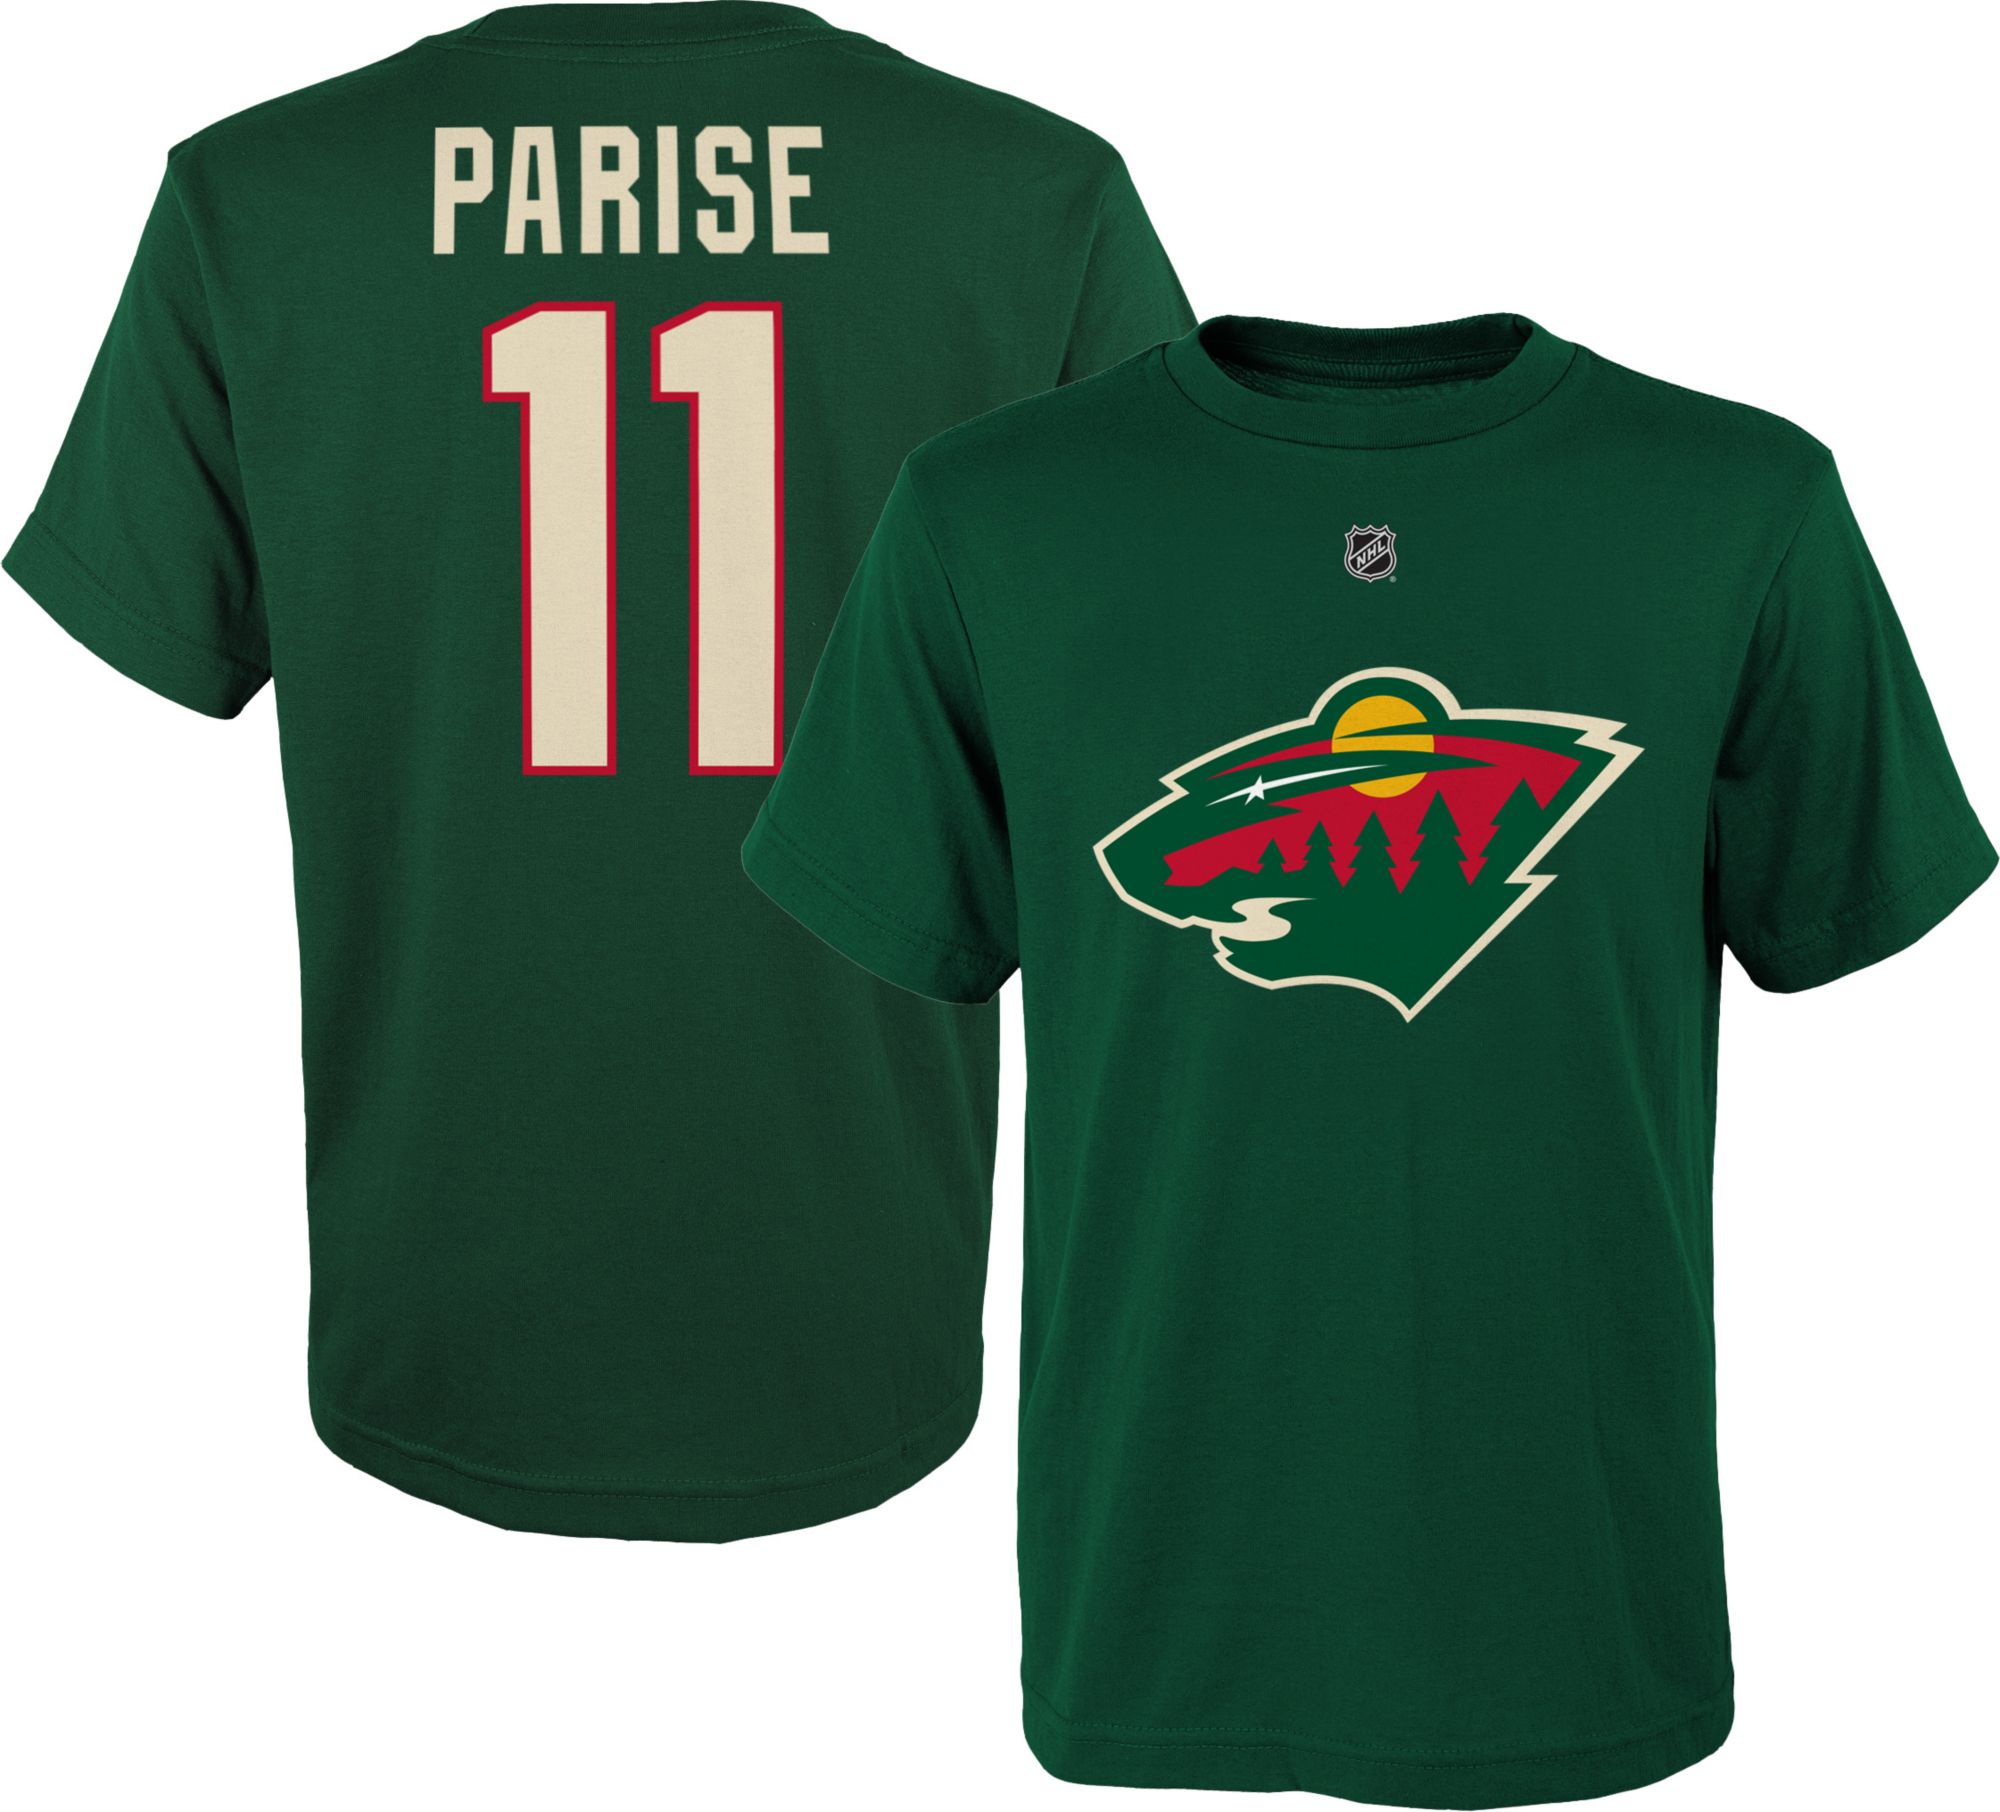 youth parise jersey